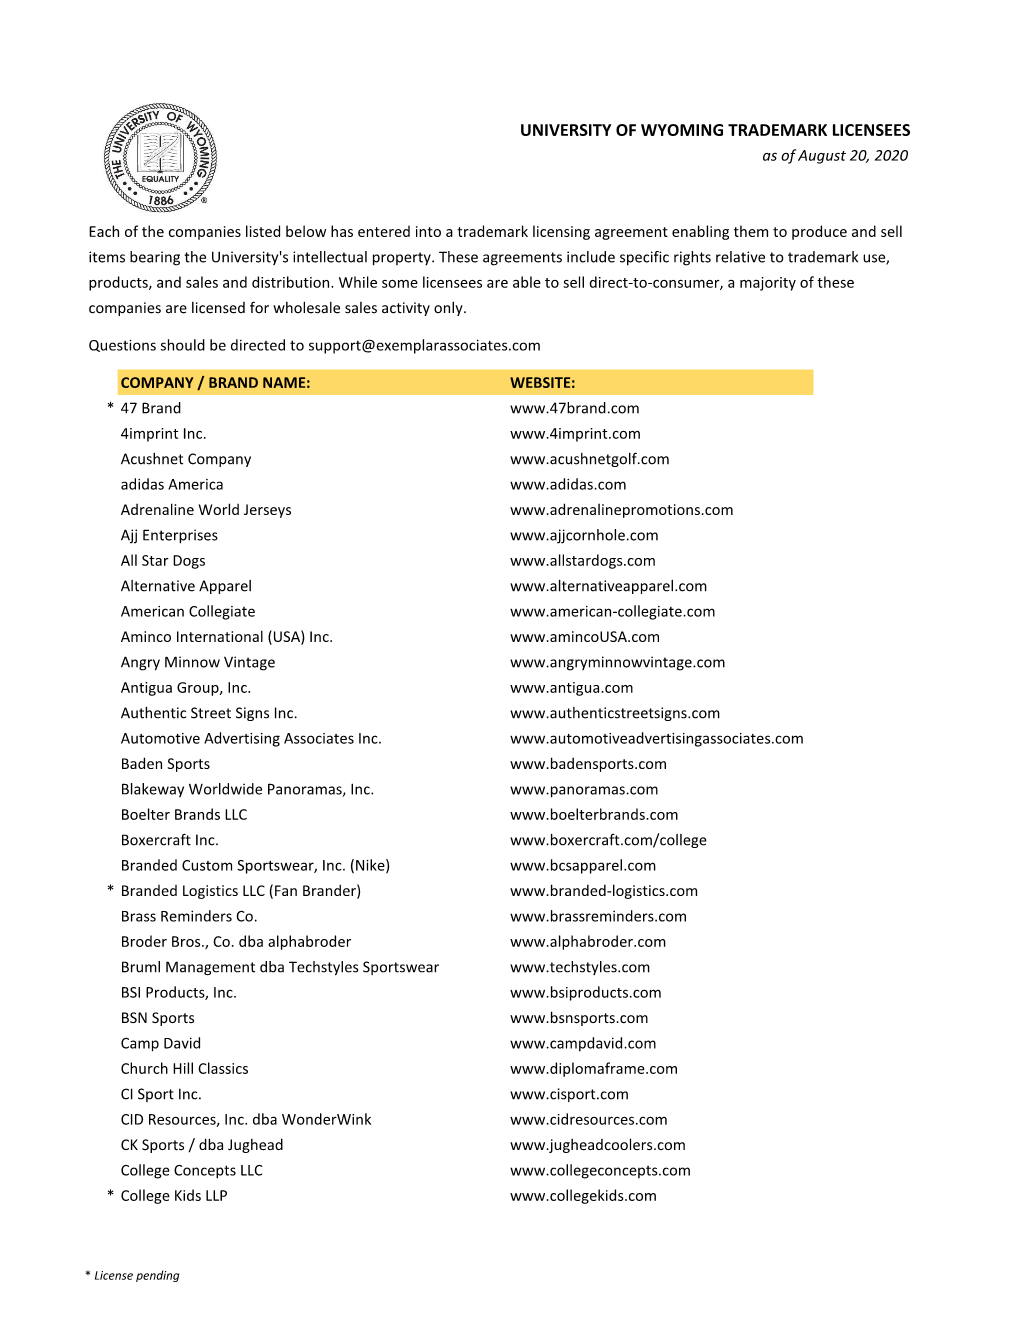 UNIVERSITY of WYOMING TRADEMARK LICENSEES As of August 20, 2020